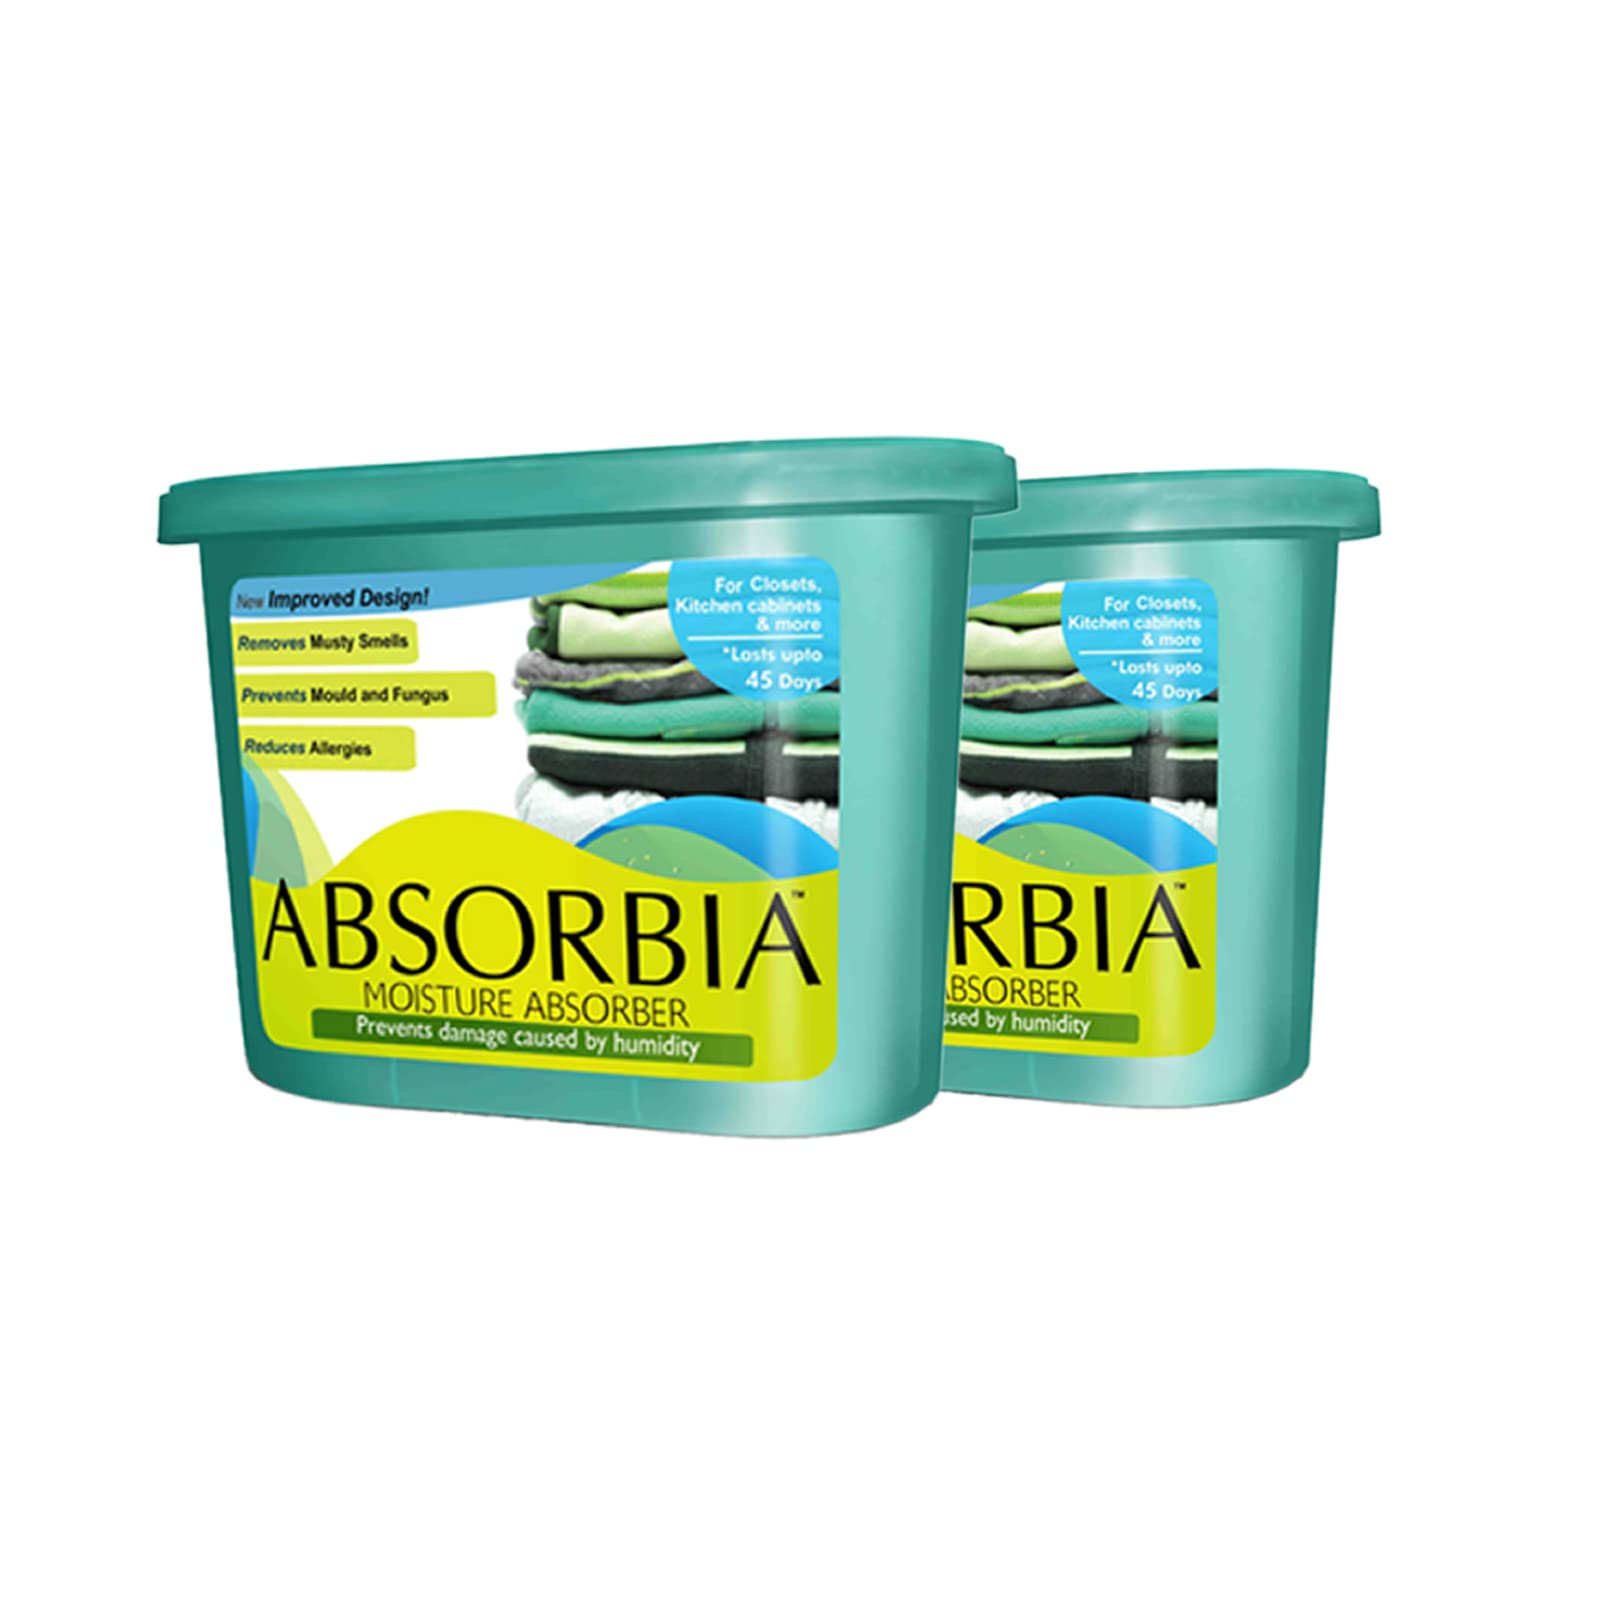 Absorbia Moisture Absorber | Absorbia Classic (300 gms X 2 boxes)- Value Pack of 2 | Absorption Capacity 600ml Each|Dehumidier for Wardrobe etc| Fights Against Moisture, Mould, Fungus & Musty smells